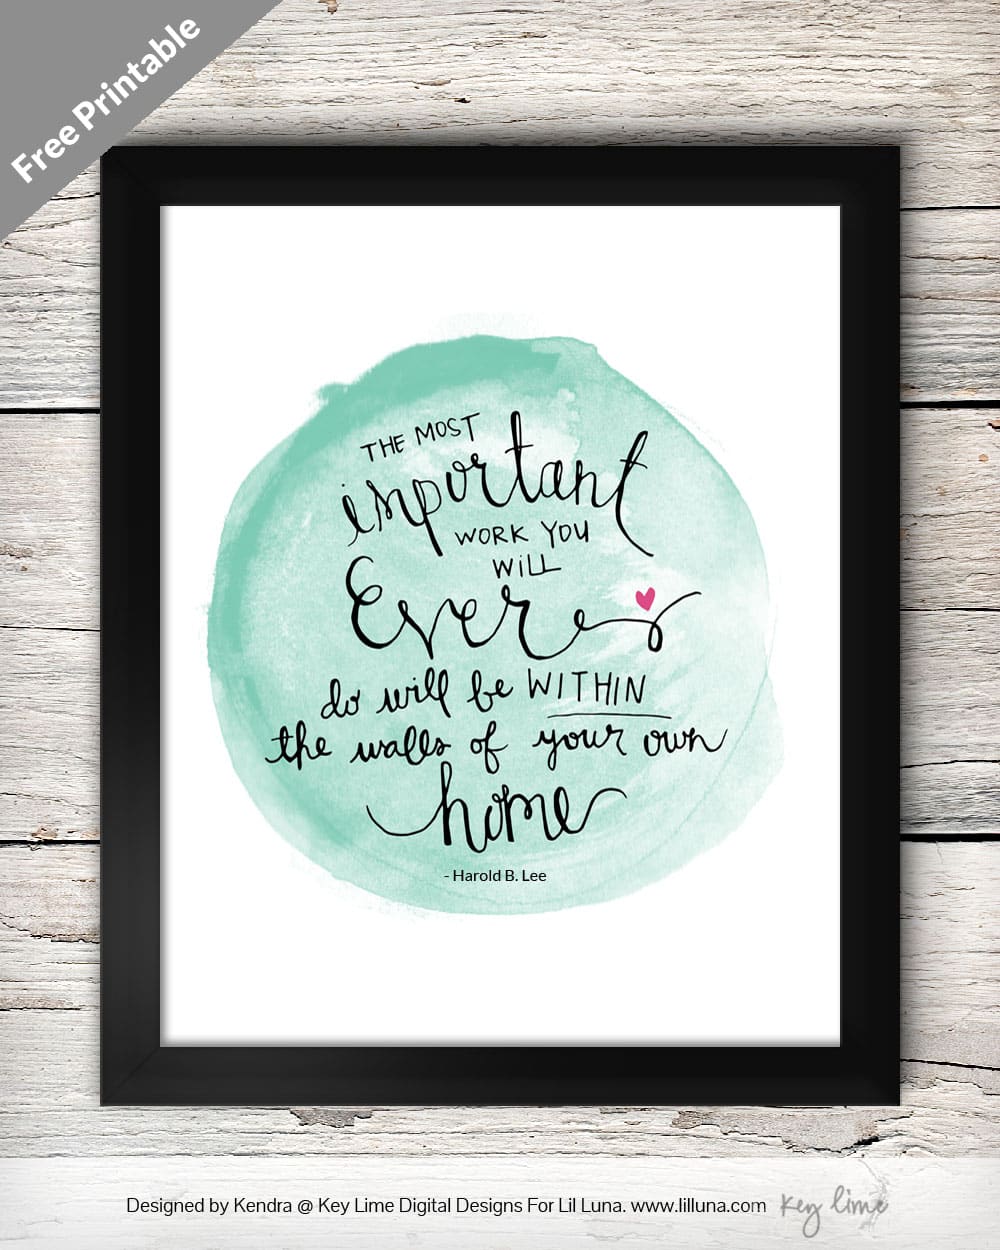 The Most Important Work You will ever do will be within the walls of your own home - LOVE this quote! Free print on { lilluna.com } This makes great decor or as a gift!!